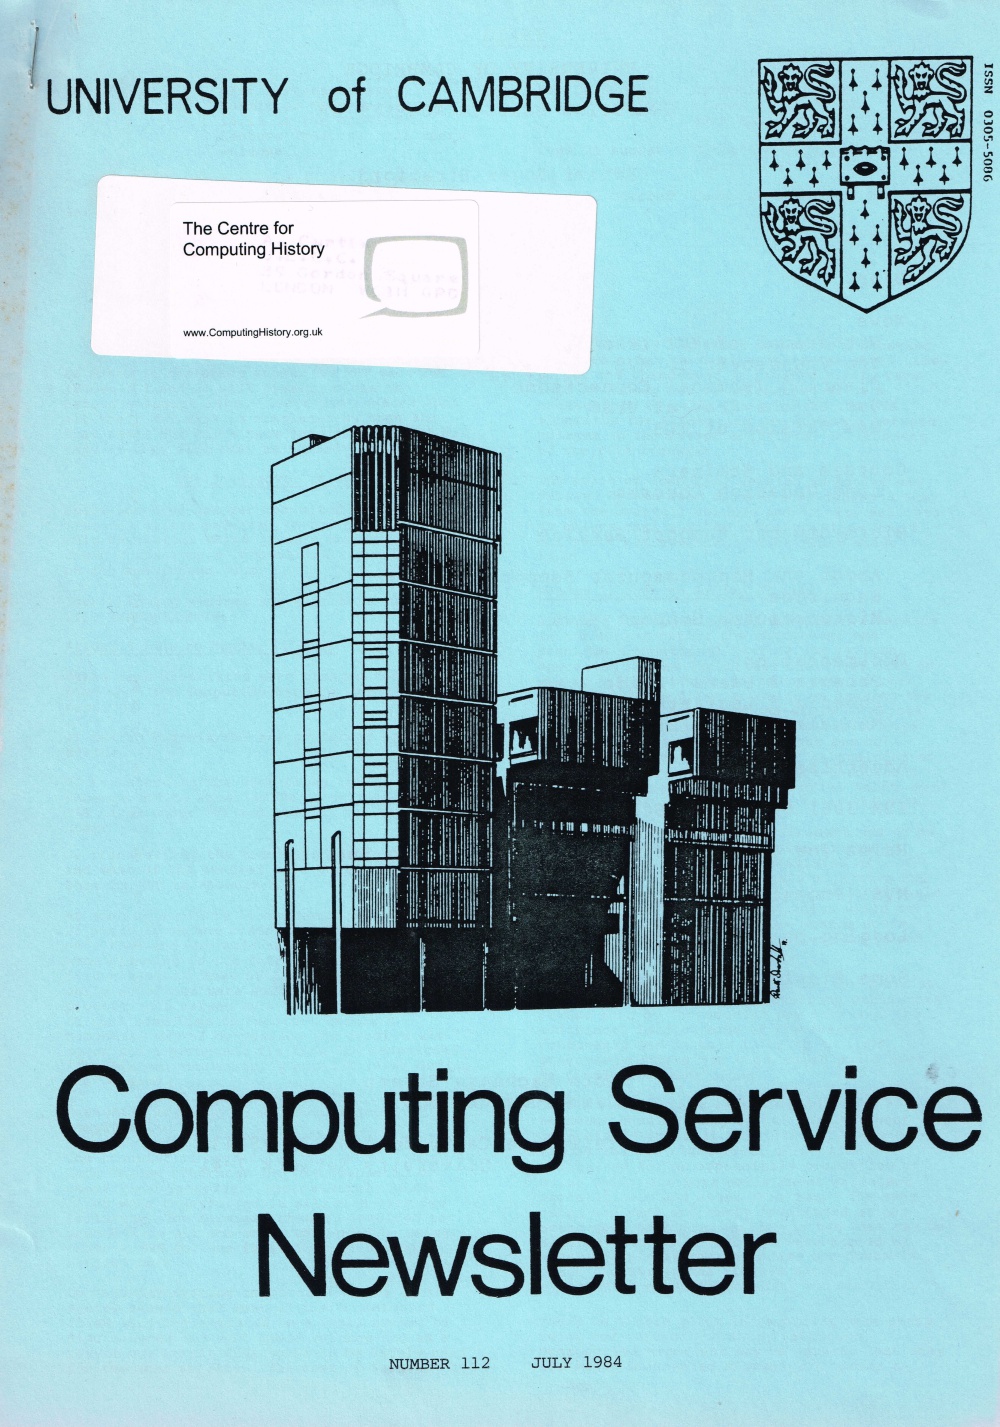 Article: University of Cambridge Computing Service May 1984 Newsletter 112